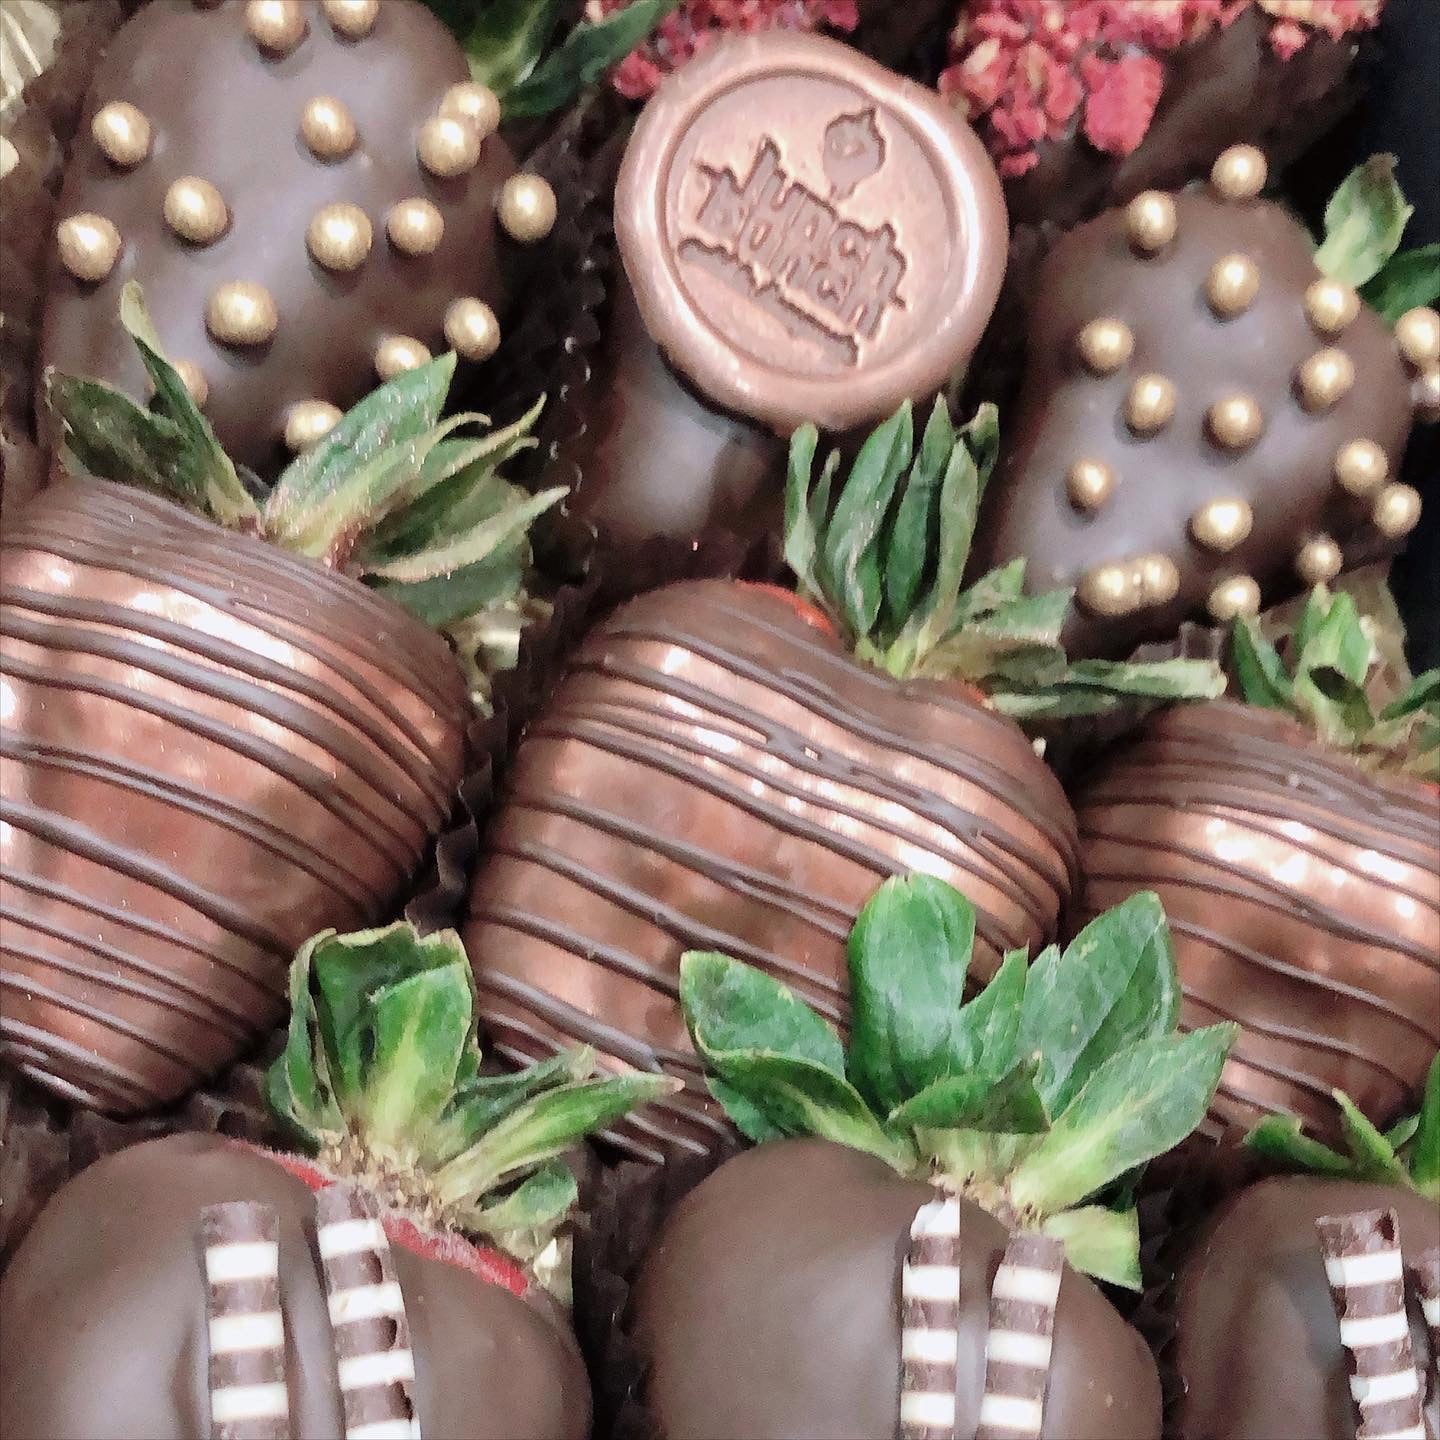 Dark vegan chocolate covered strawberries box of dozen berries for a sweet treat Adelaide same day delivery